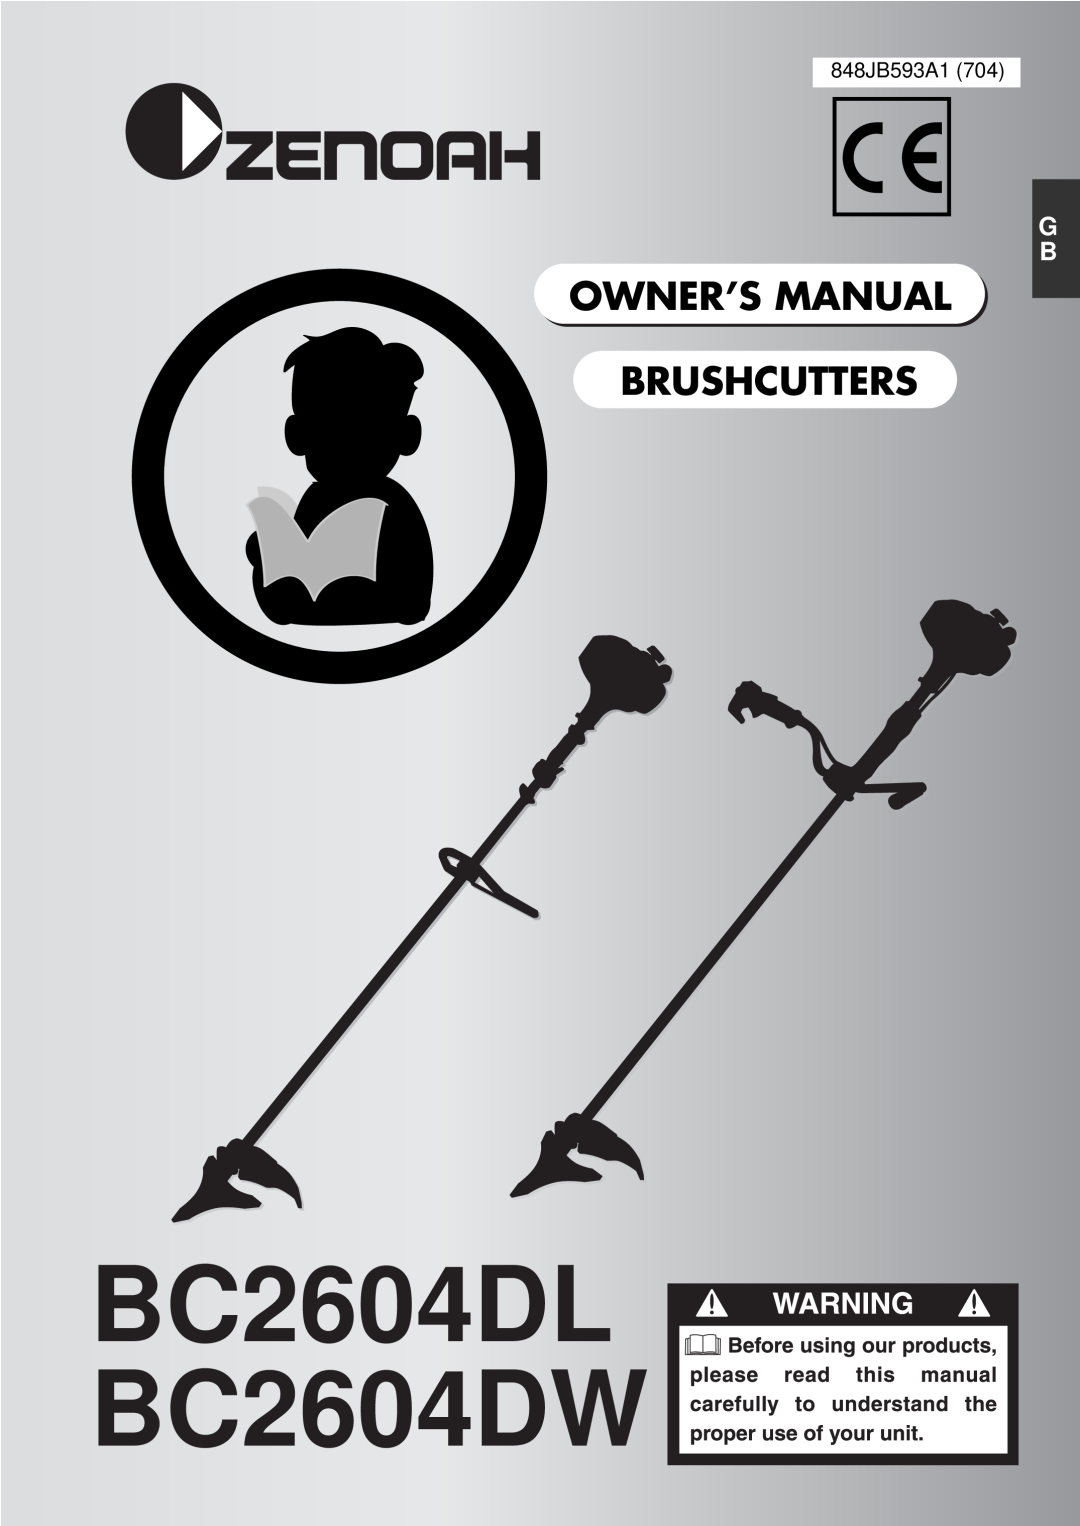 Zenoah owner manual 848JB593A1, BC2604DL BC2604DW, Owner’S Manual Brushcutters 